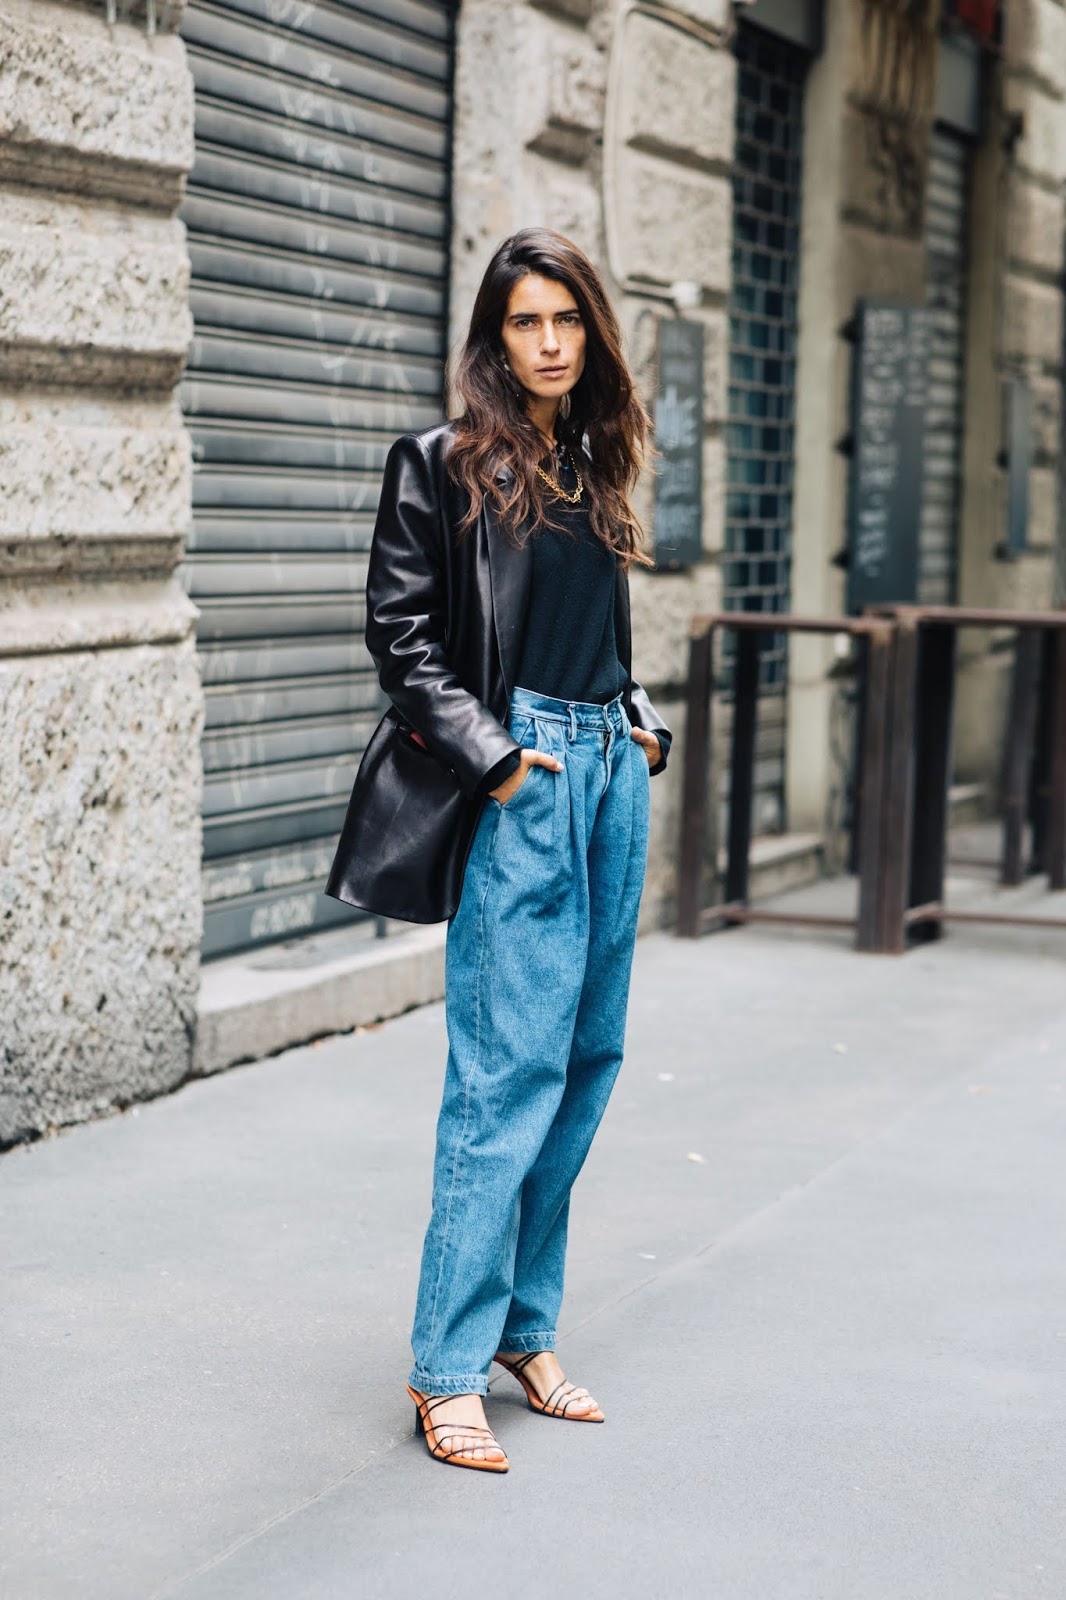 How to Wear 80s-Inspired Pleated Jeans — Street style outfit with black leather blazer, gold chain necklace, denim, and strappy sandals